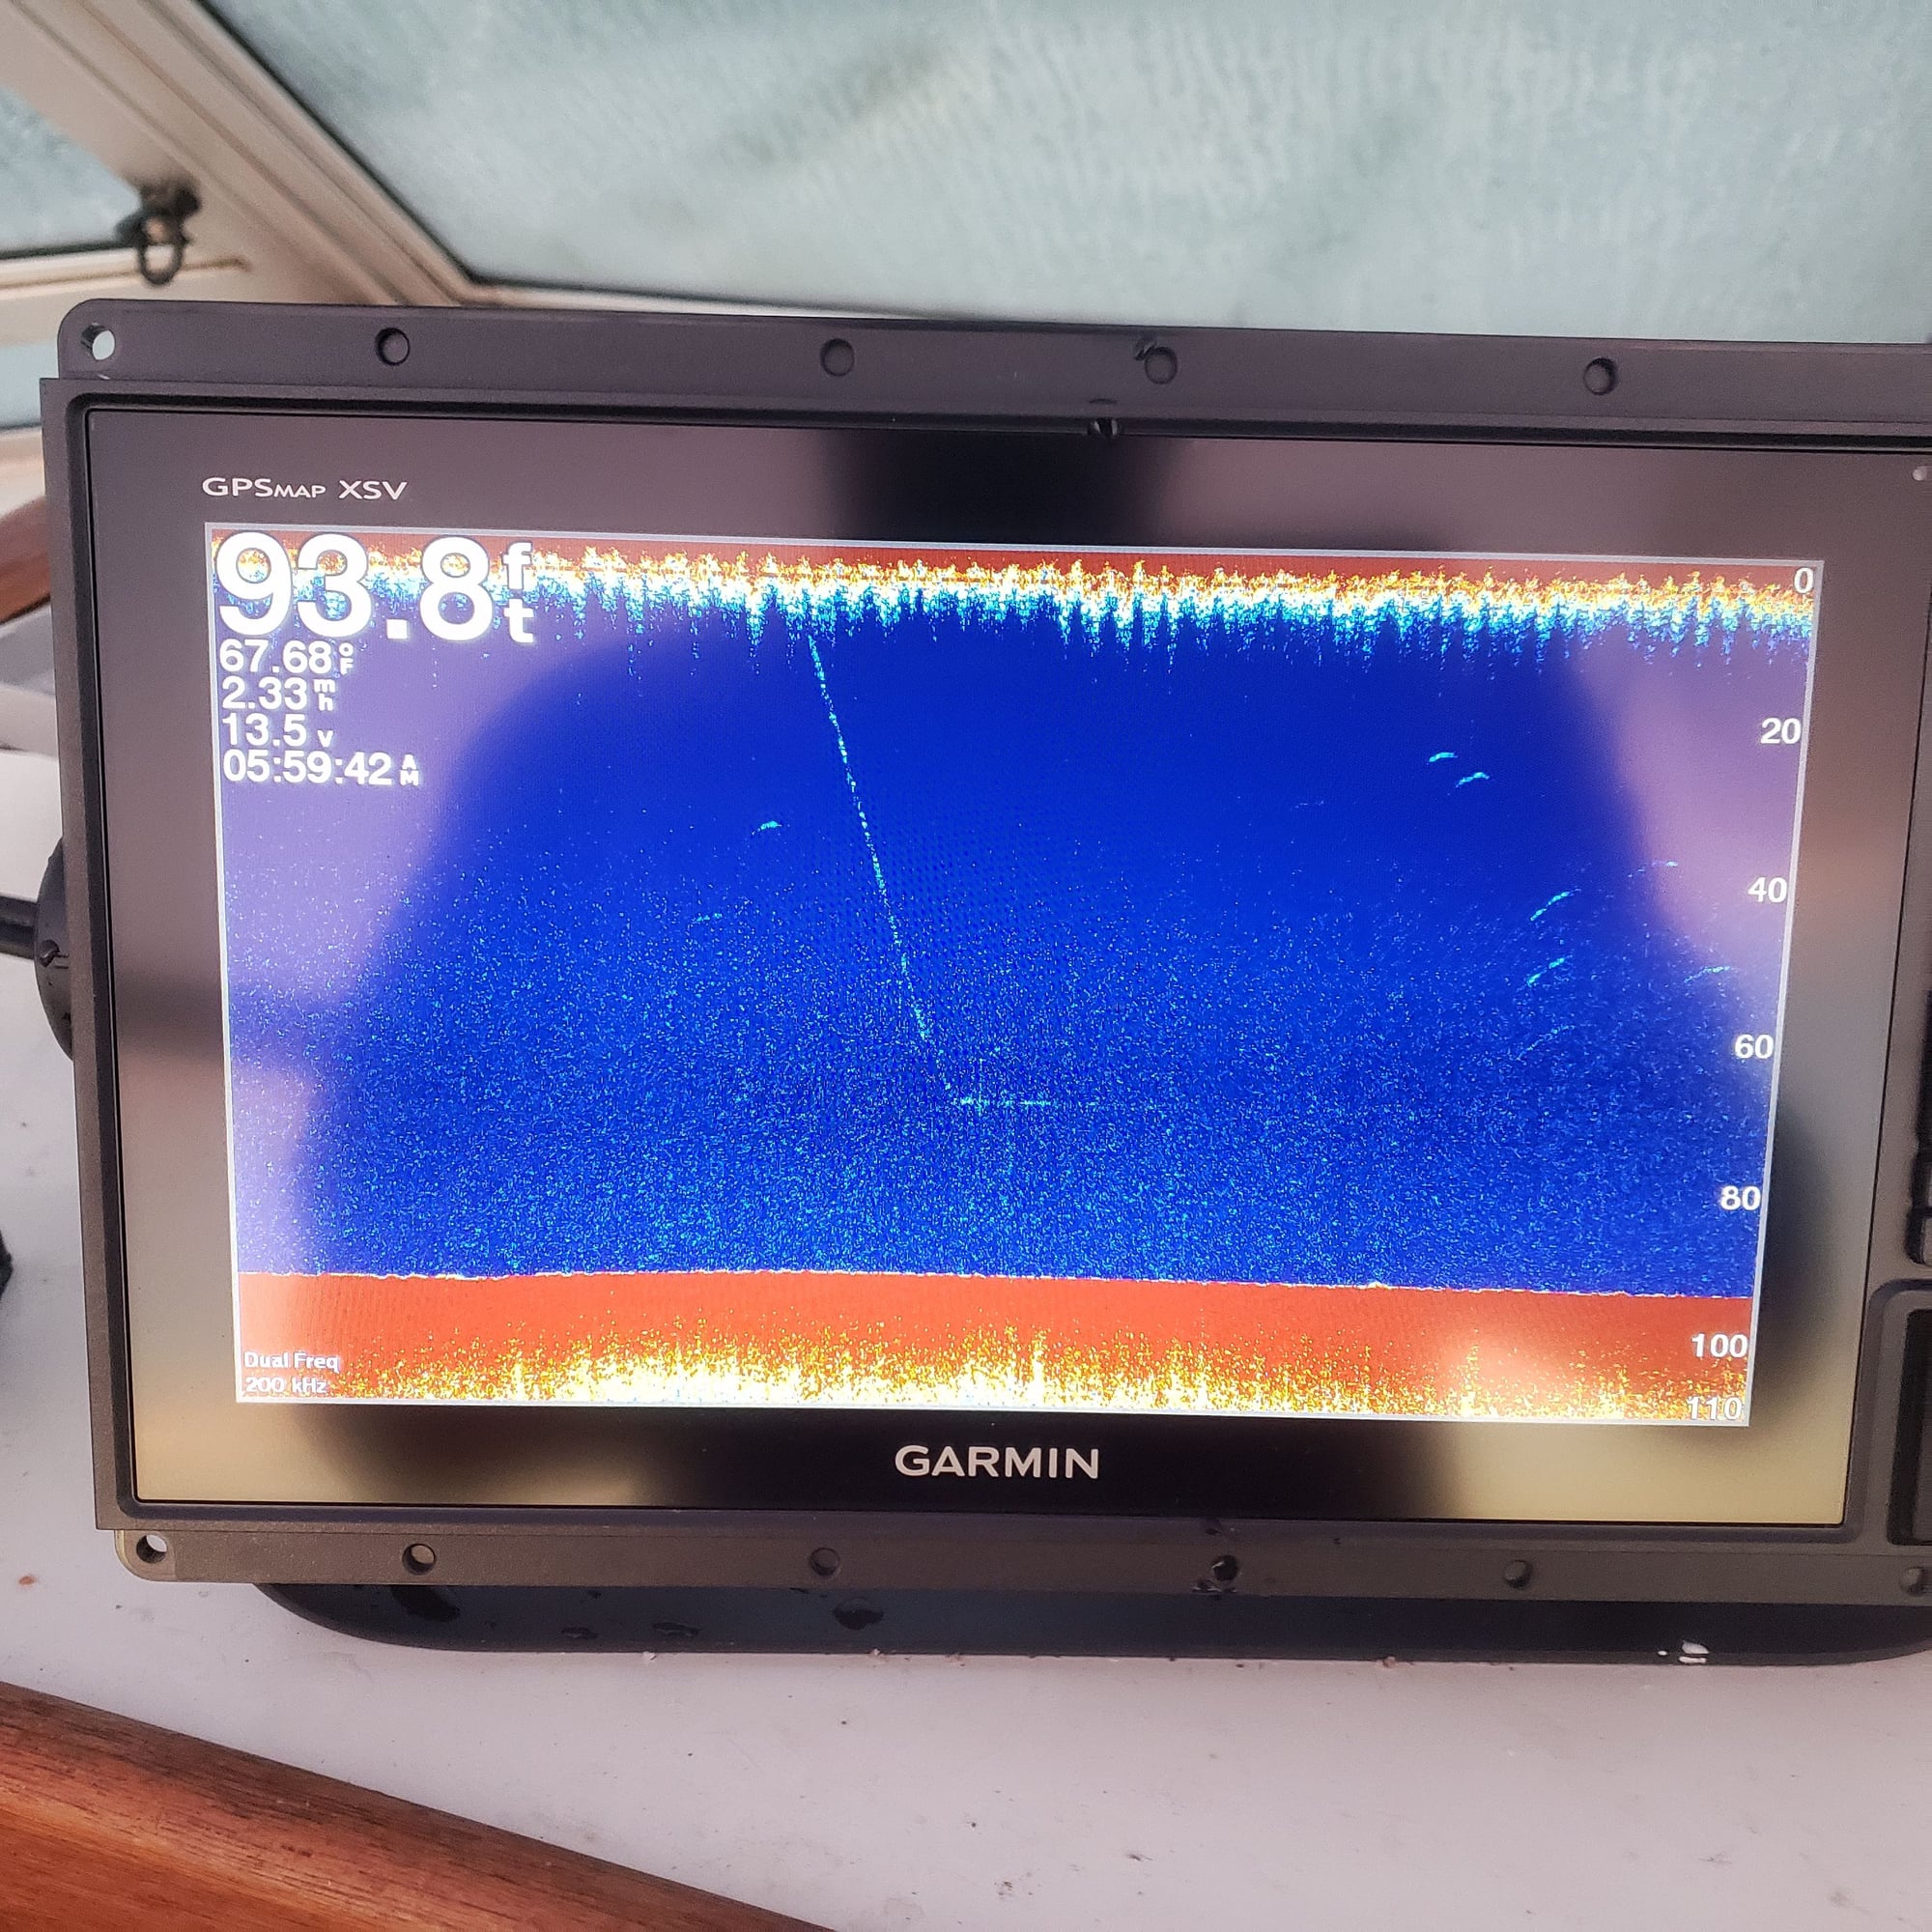 New Garmin 1042 and tm165hw help - The Hull Truth - Boating and Fishing  Forum